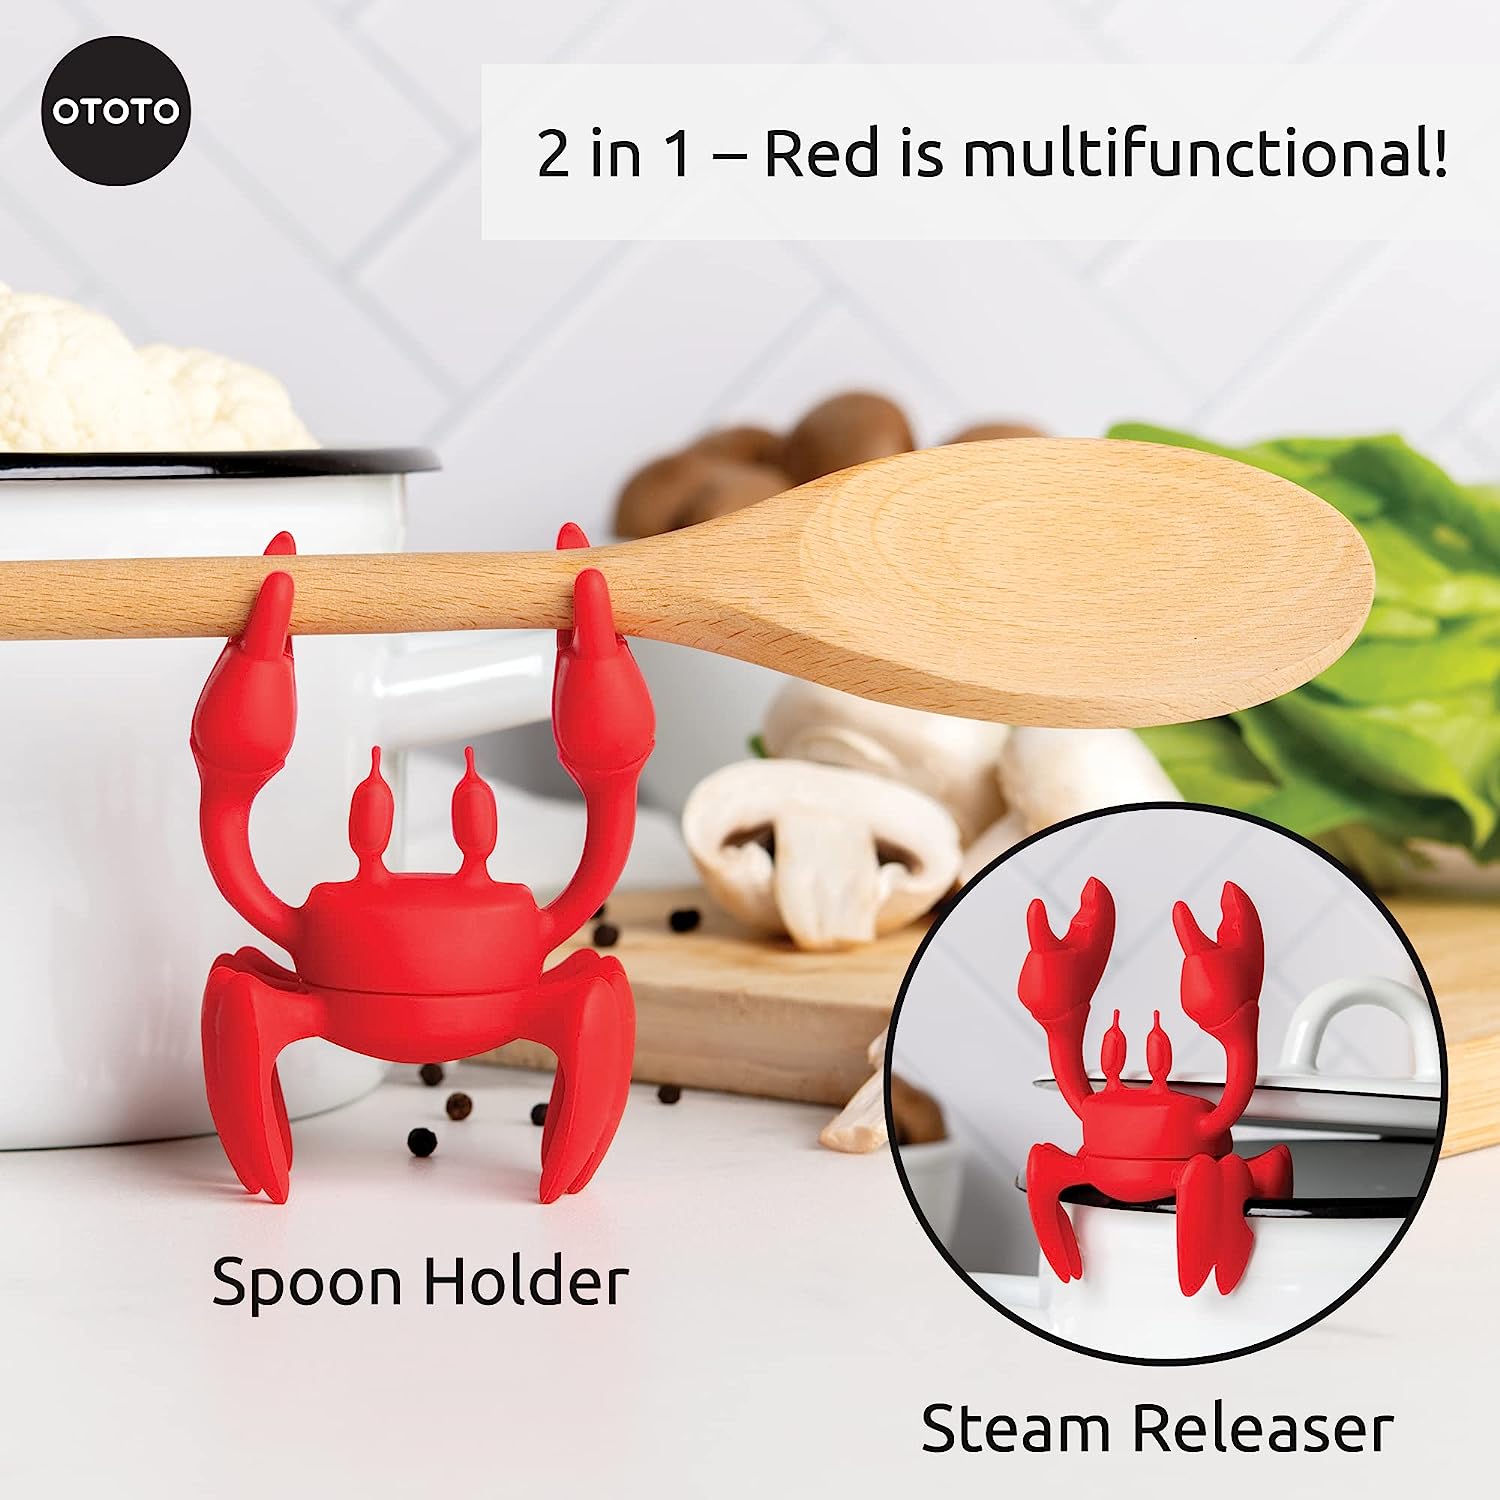 NEW!!! Flower Power Steam Releaser By OTOTO - Fun Kitchen Gadgets -  Spinning Flower Lid Holder On Pot & Lid Lifter - Cool Kitchen Gadgets -  Cute Gifts